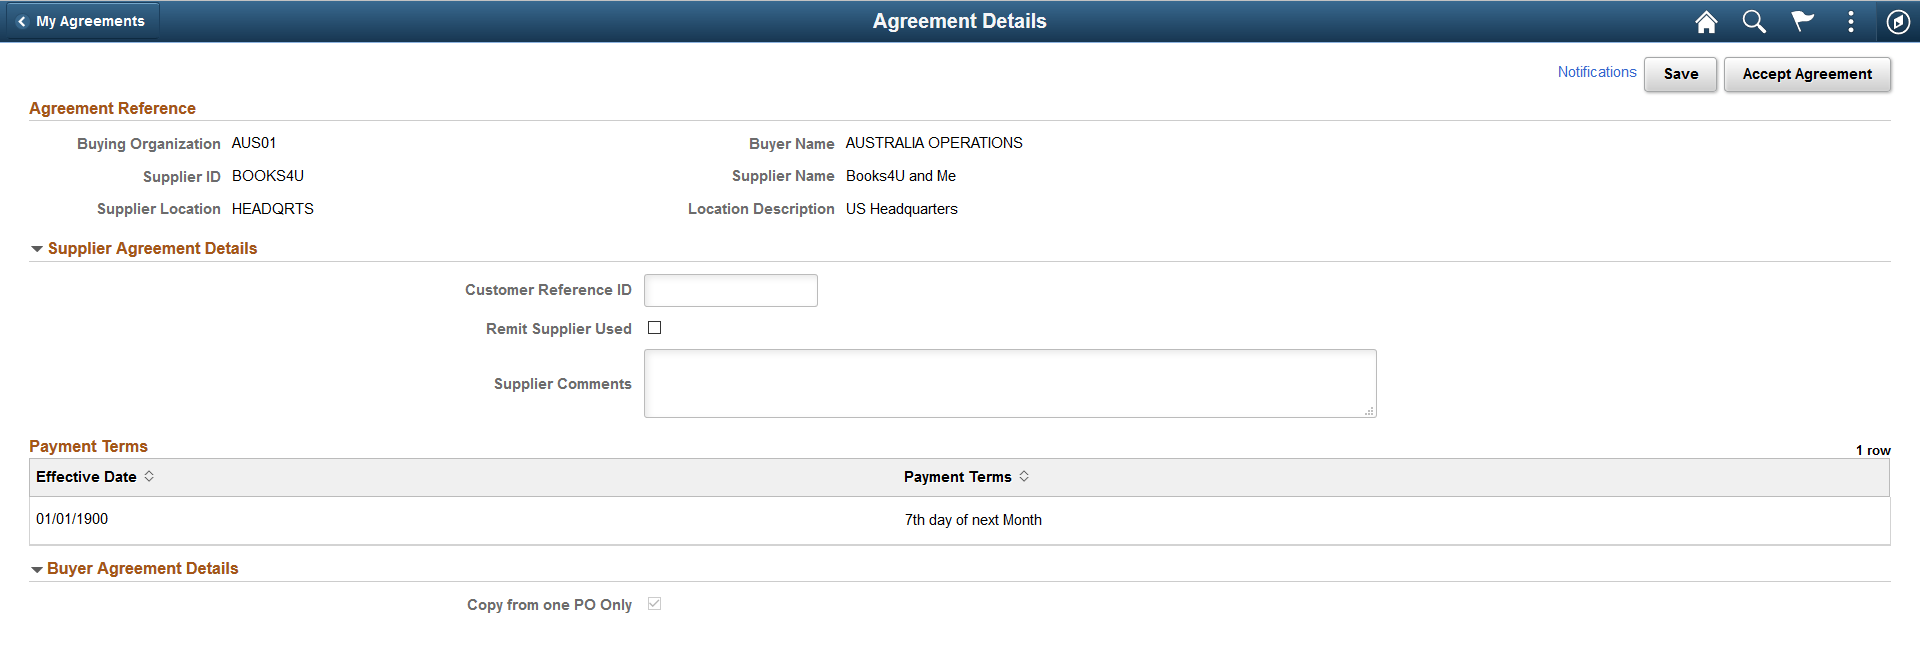 My Agreement Details page